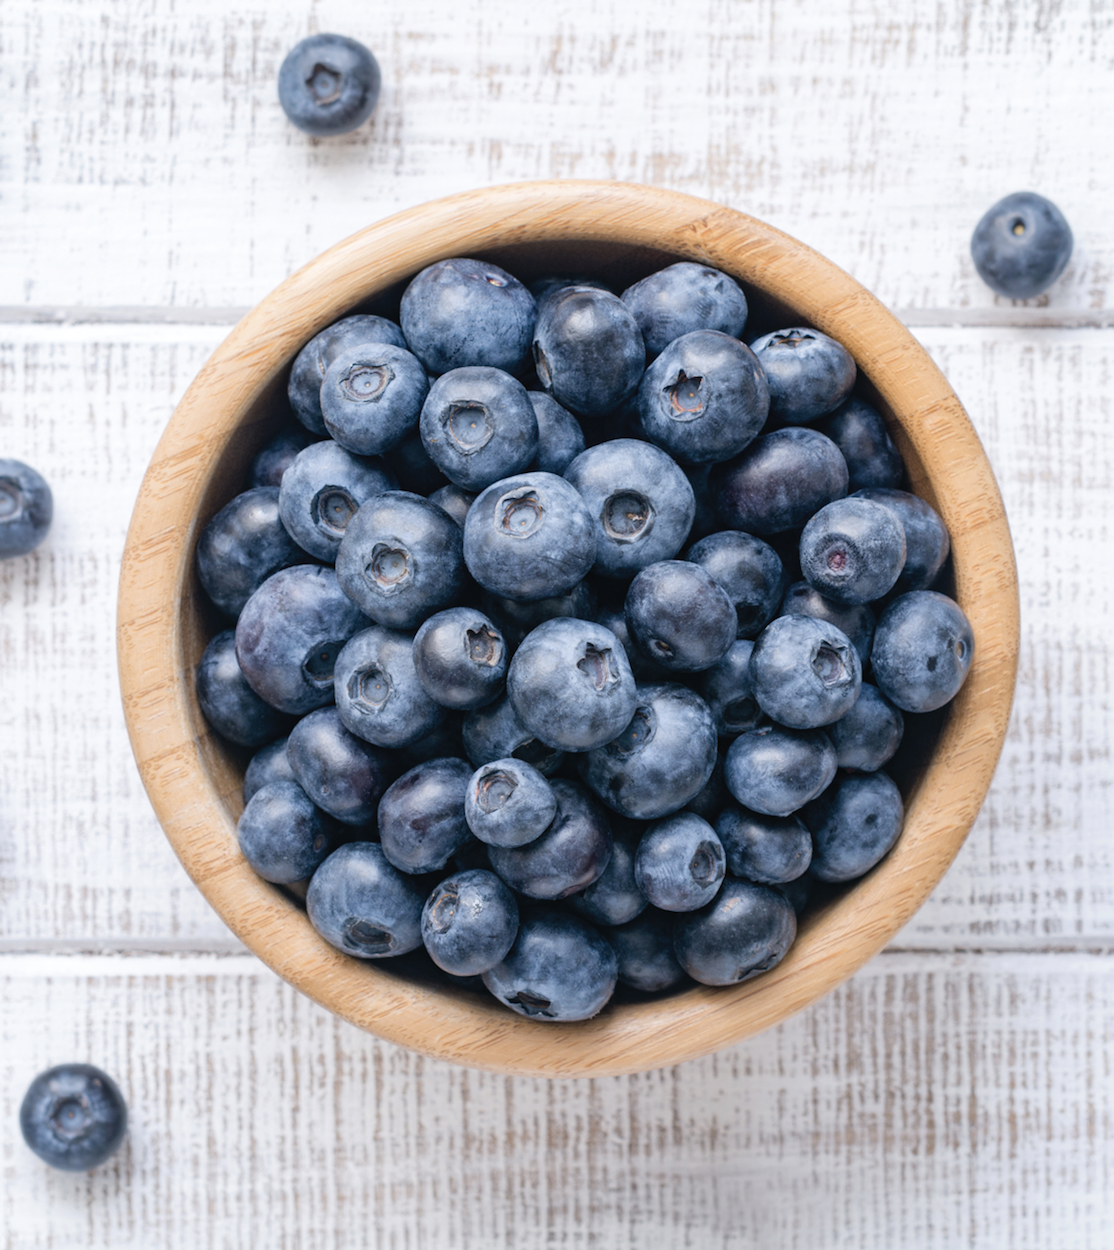 12 Foods to Help You Focus